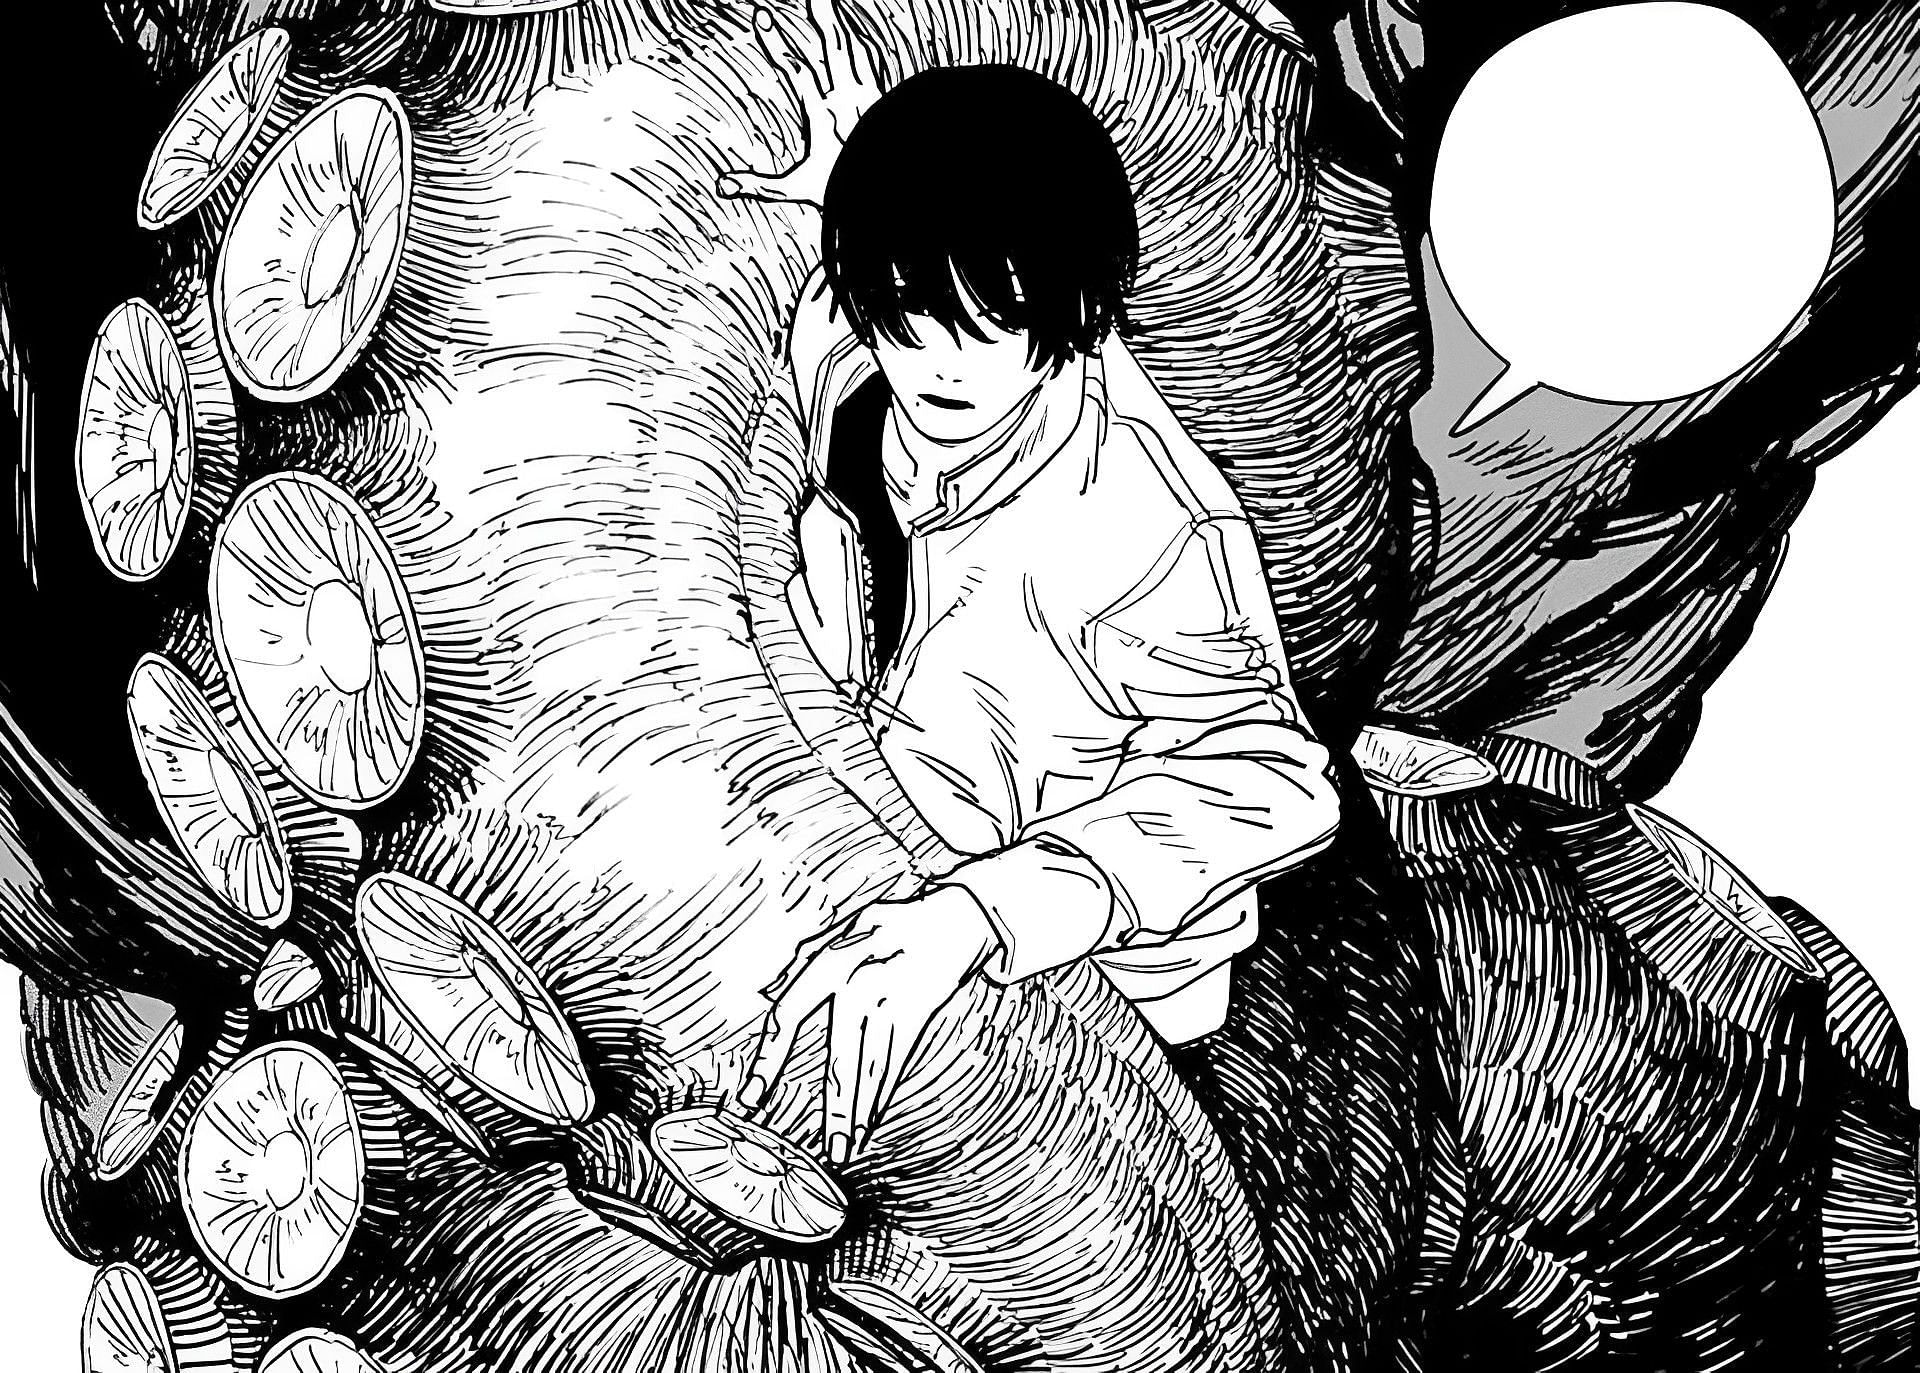 Chainsaw Man Chapter 137 Release Date & Where to Read